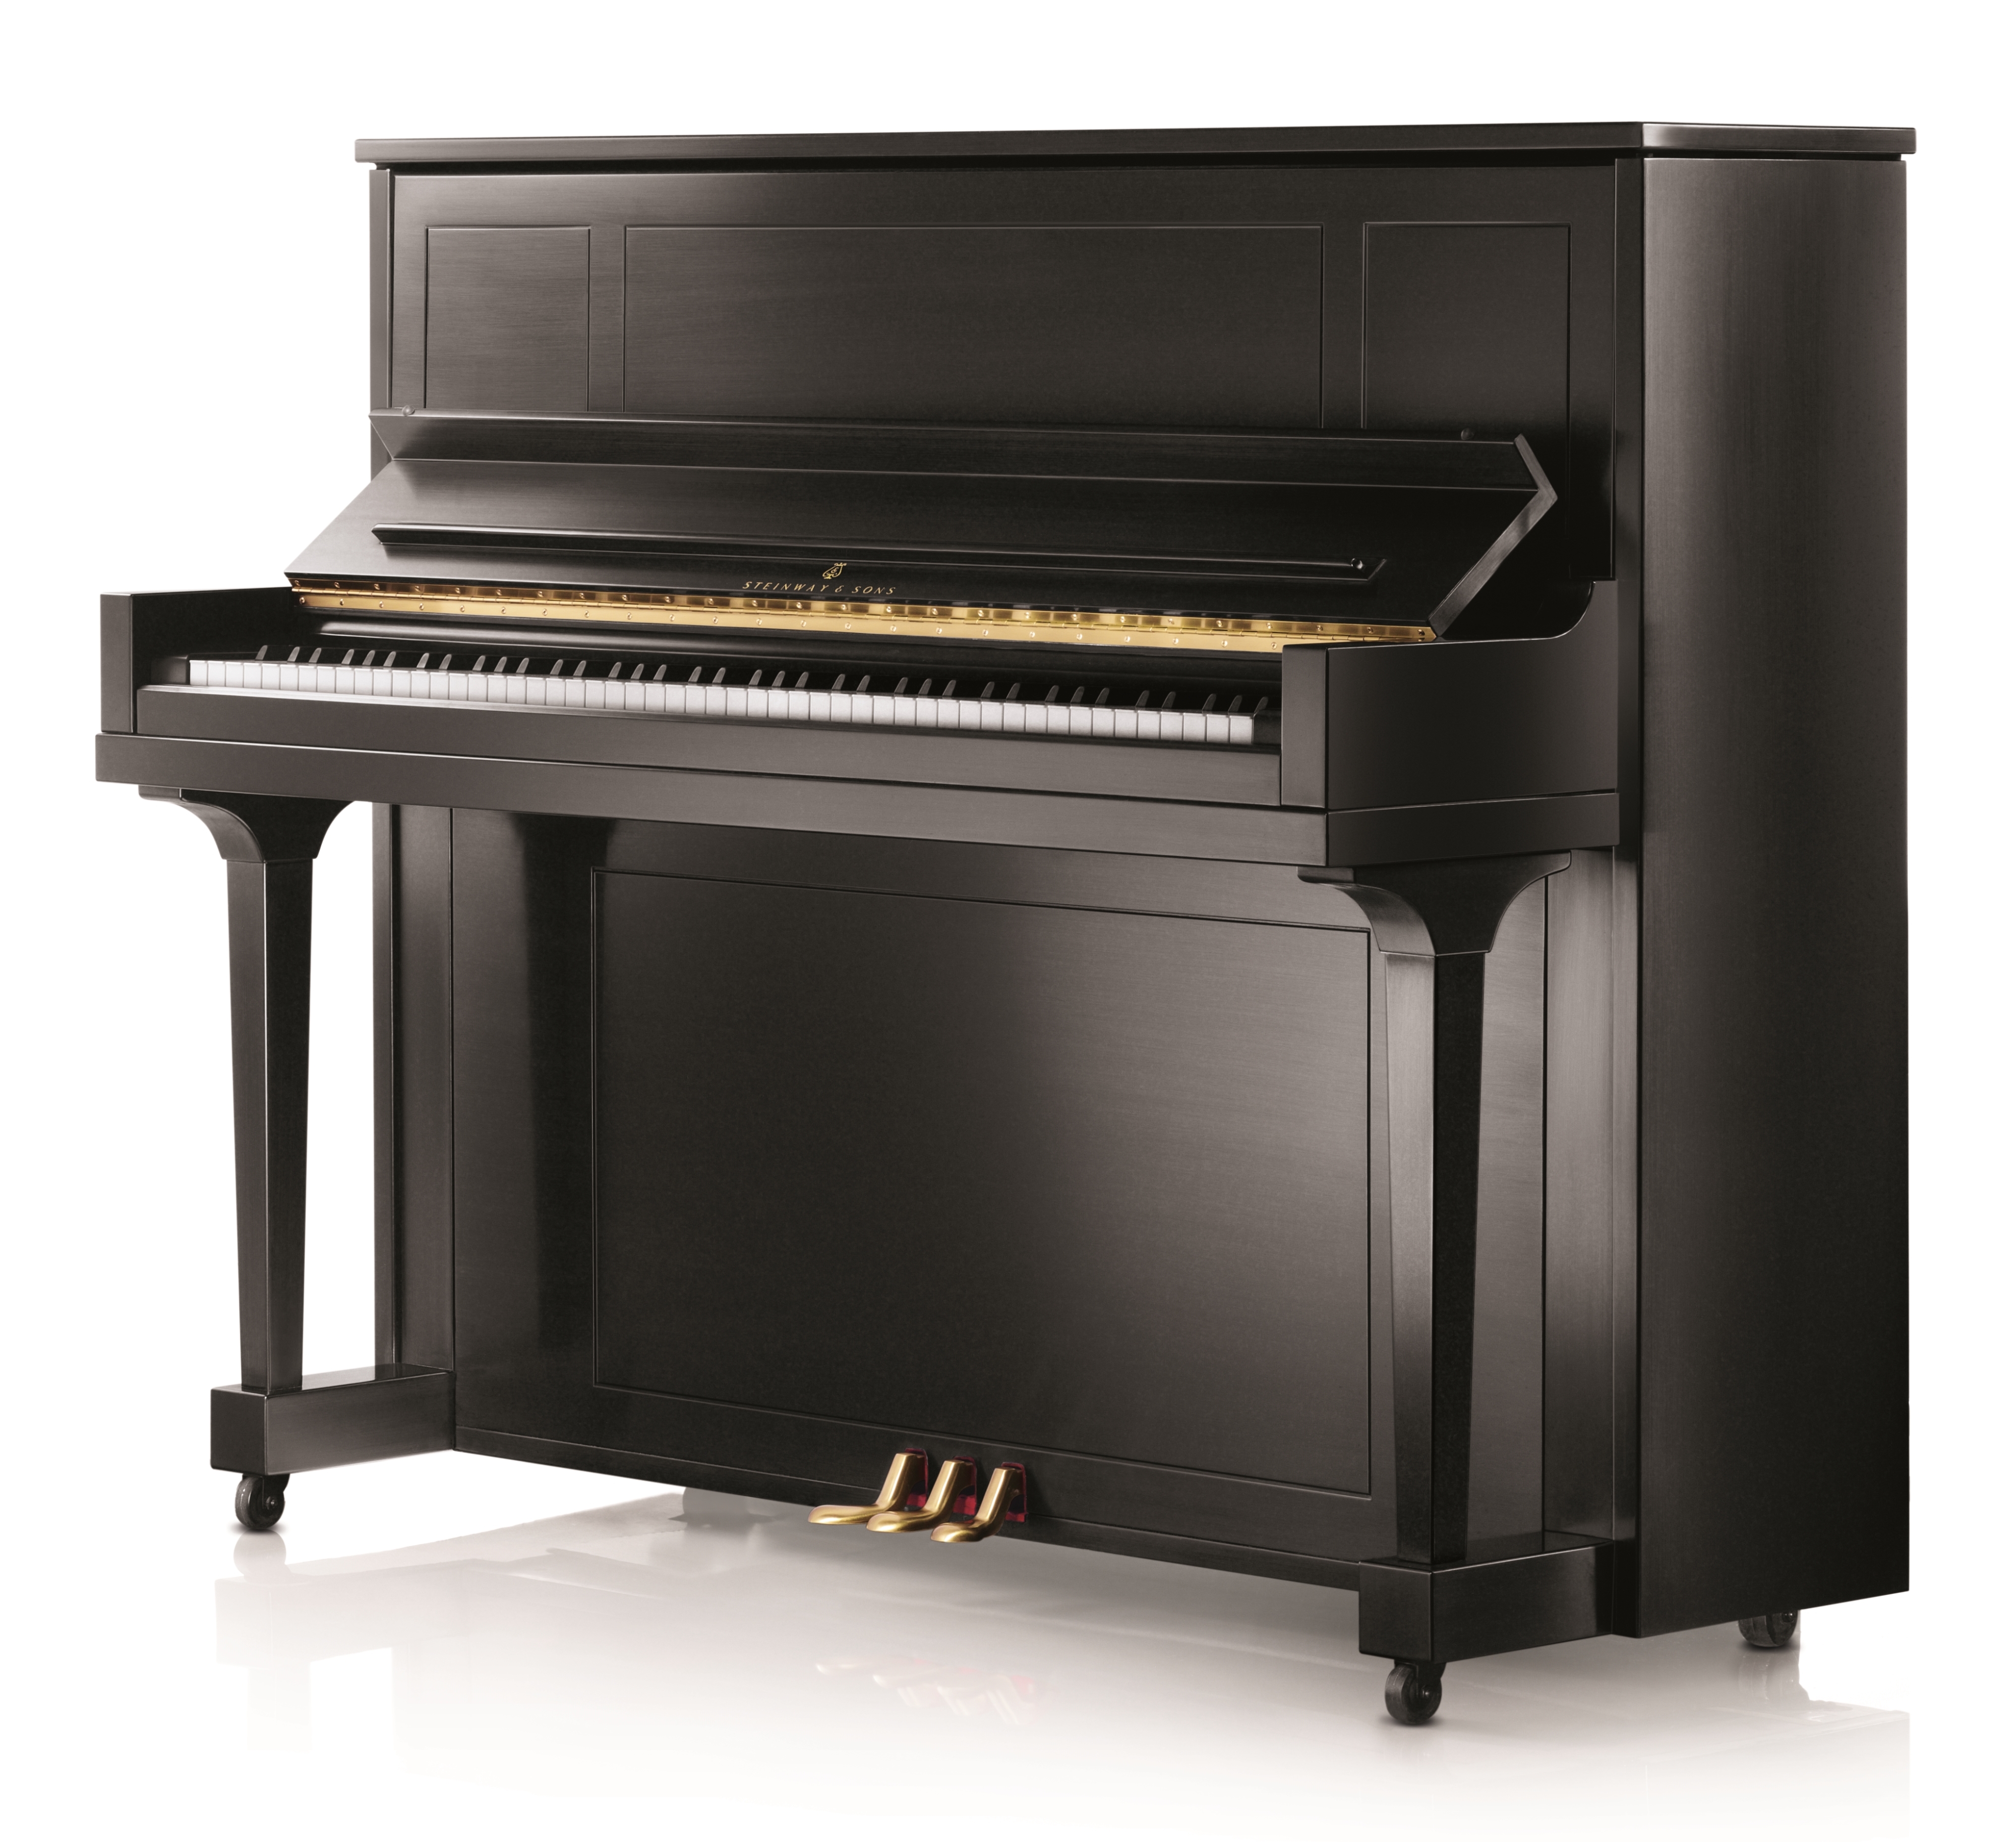 Steinway & Sons upright piano, model 1098, manufactured at Steinway's factory in New York City